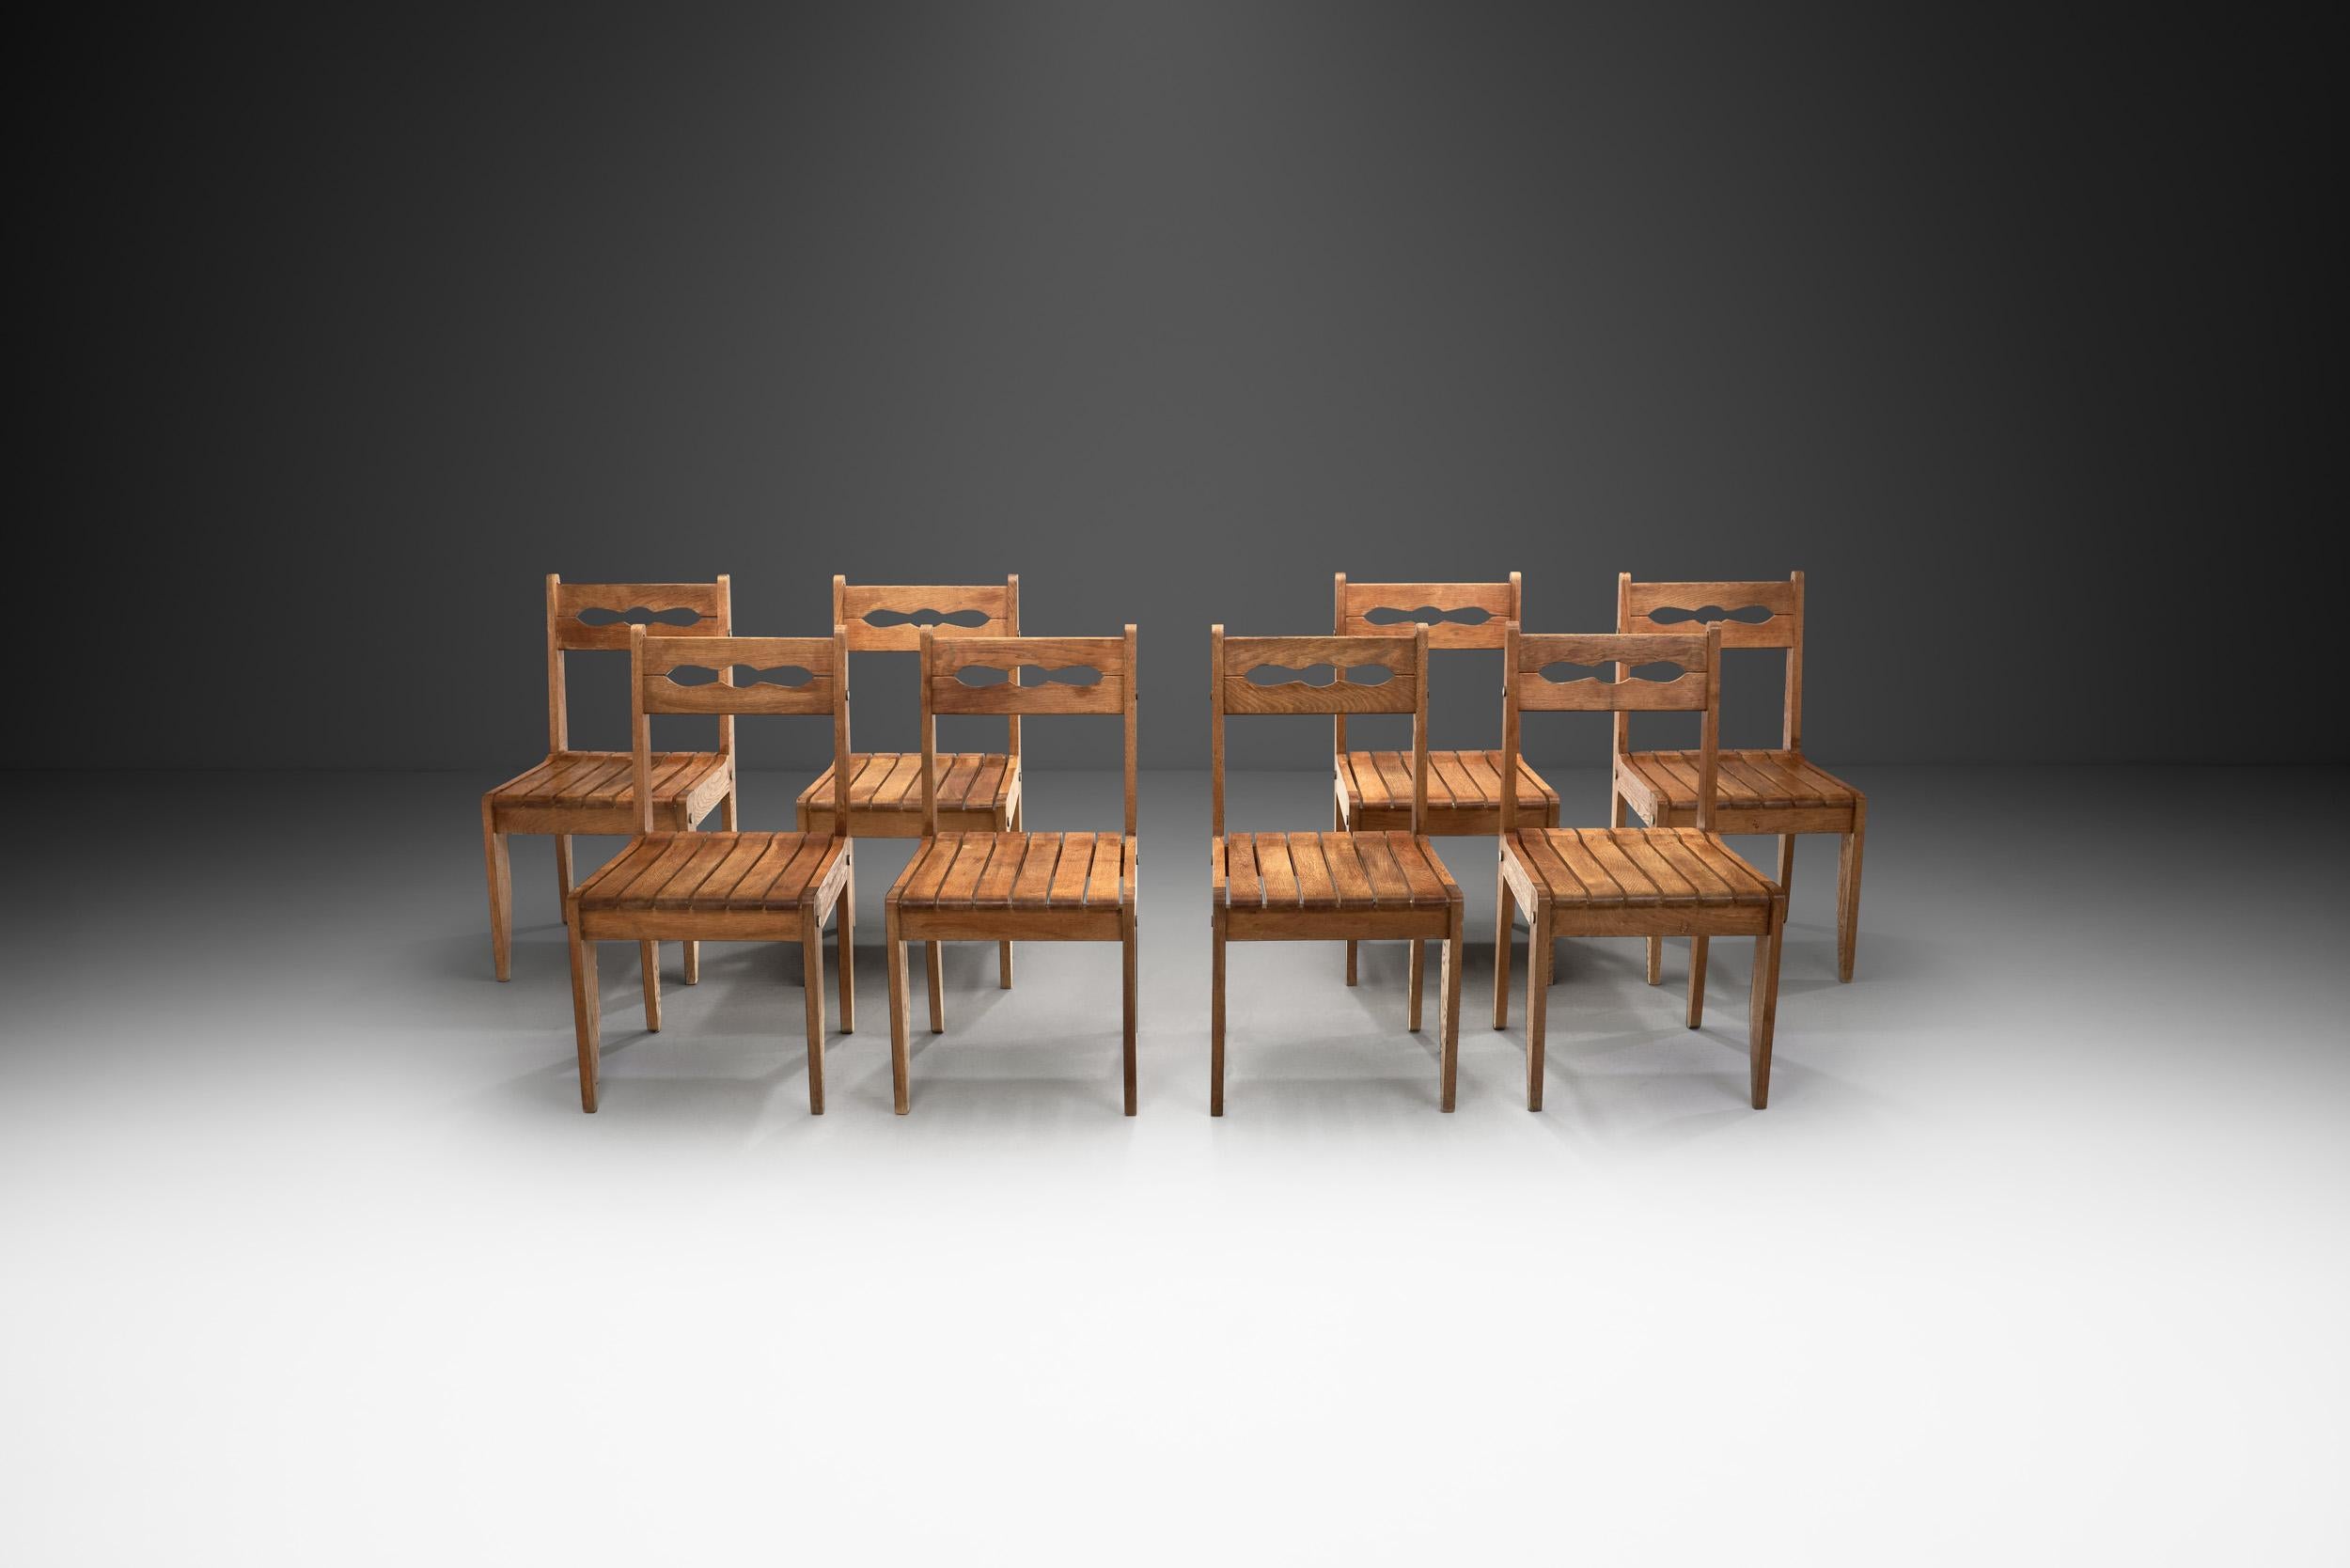 Mid-Century Modern Guillerme et Chambron Oak Chairs with Wooden Slatted Seats, France 1960s For Sale